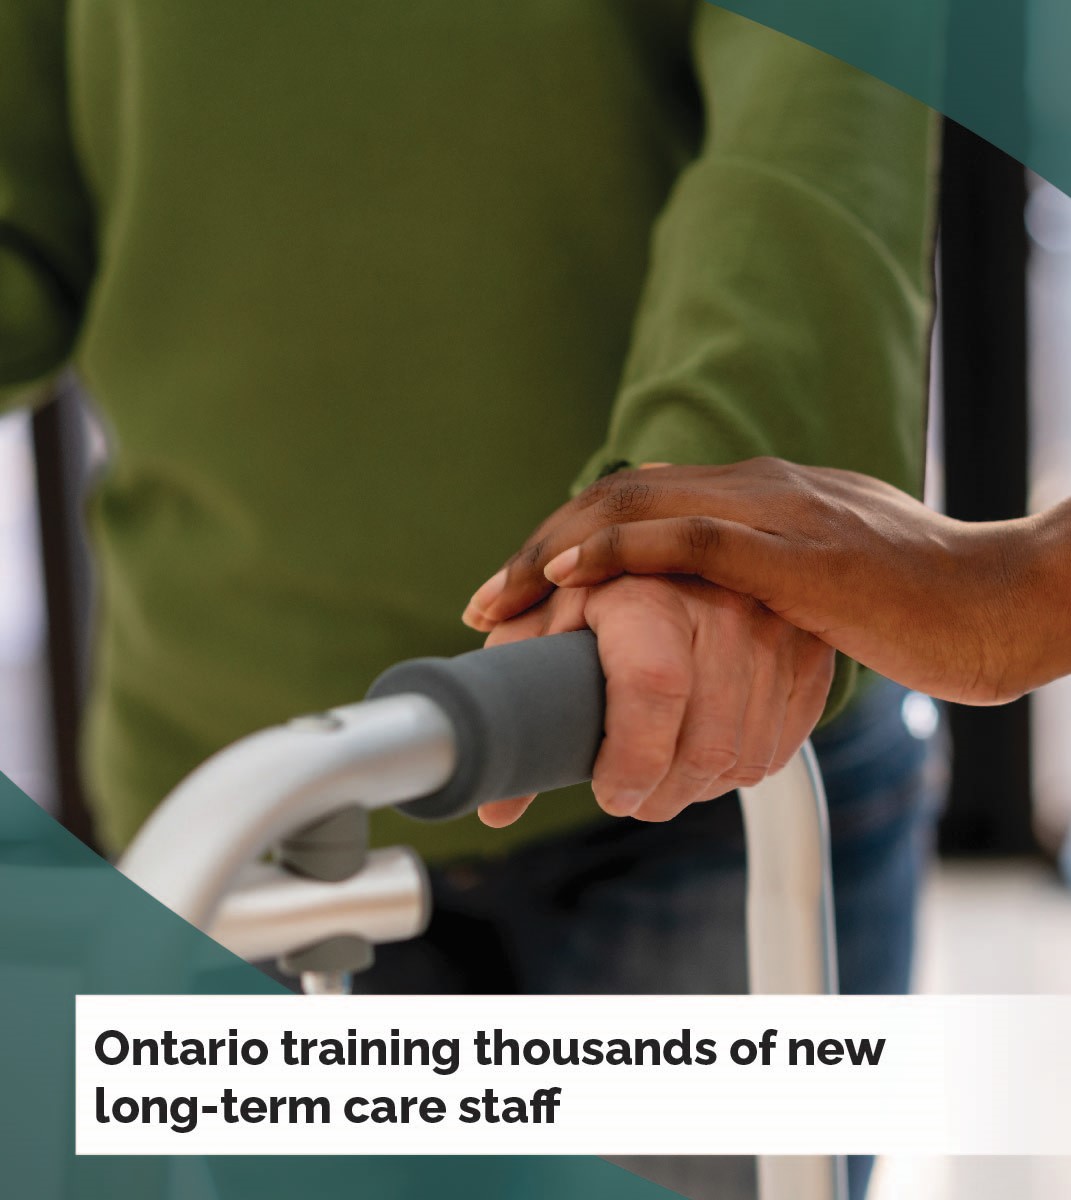 Ontario Training Thousands of New Long-Term Care Staff